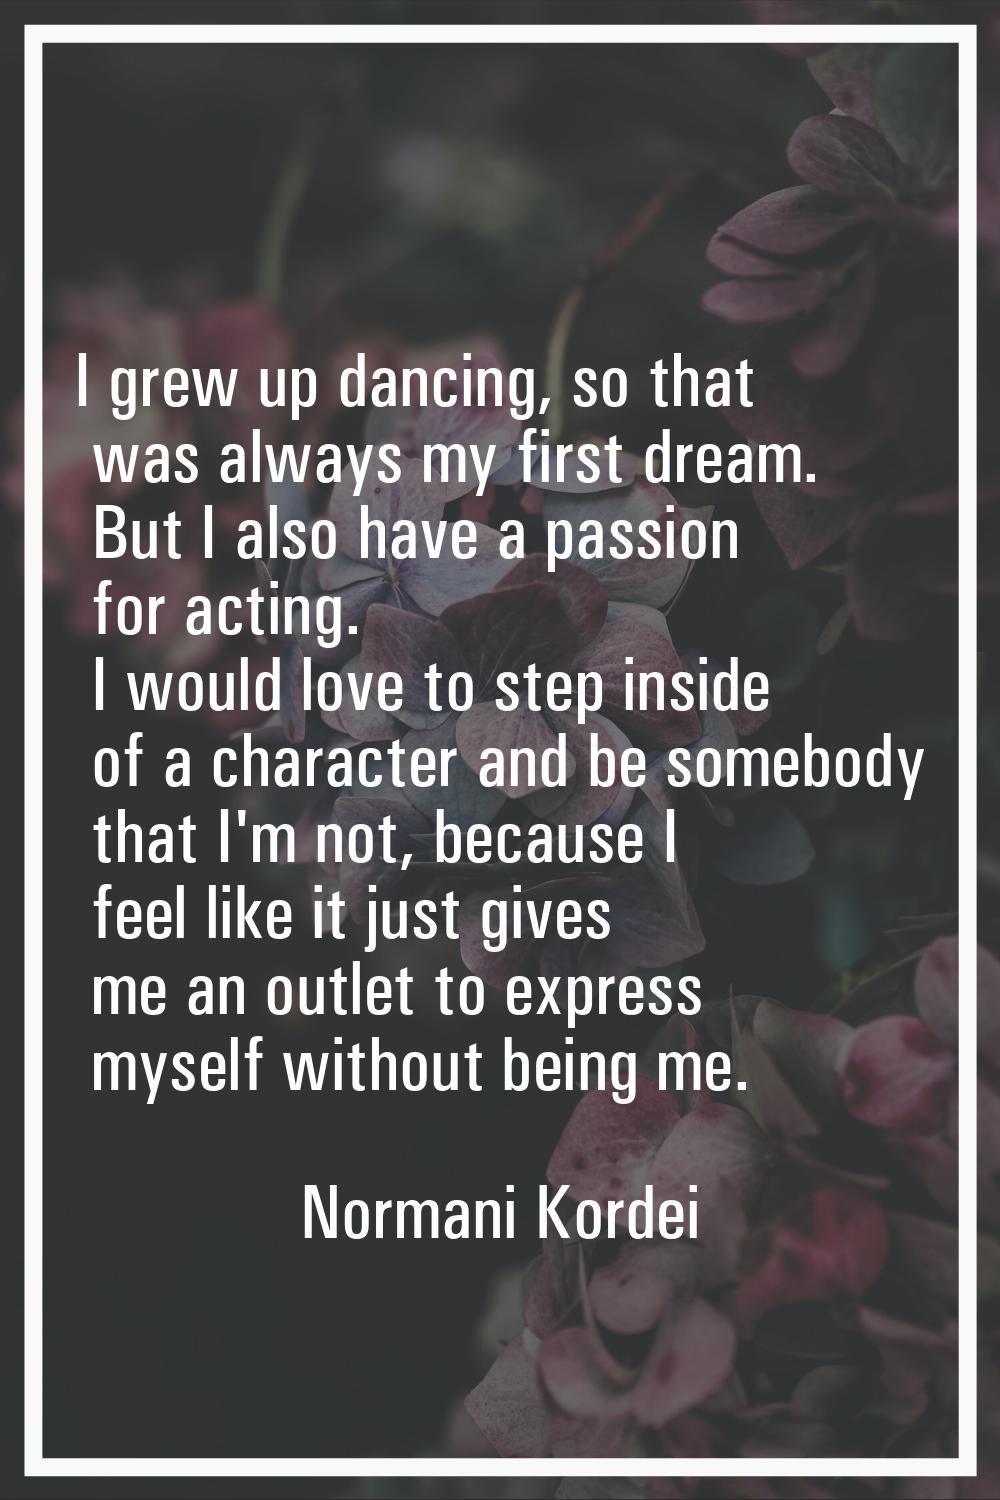 I grew up dancing, so that was always my first dream. But I also have a passion for acting. I would